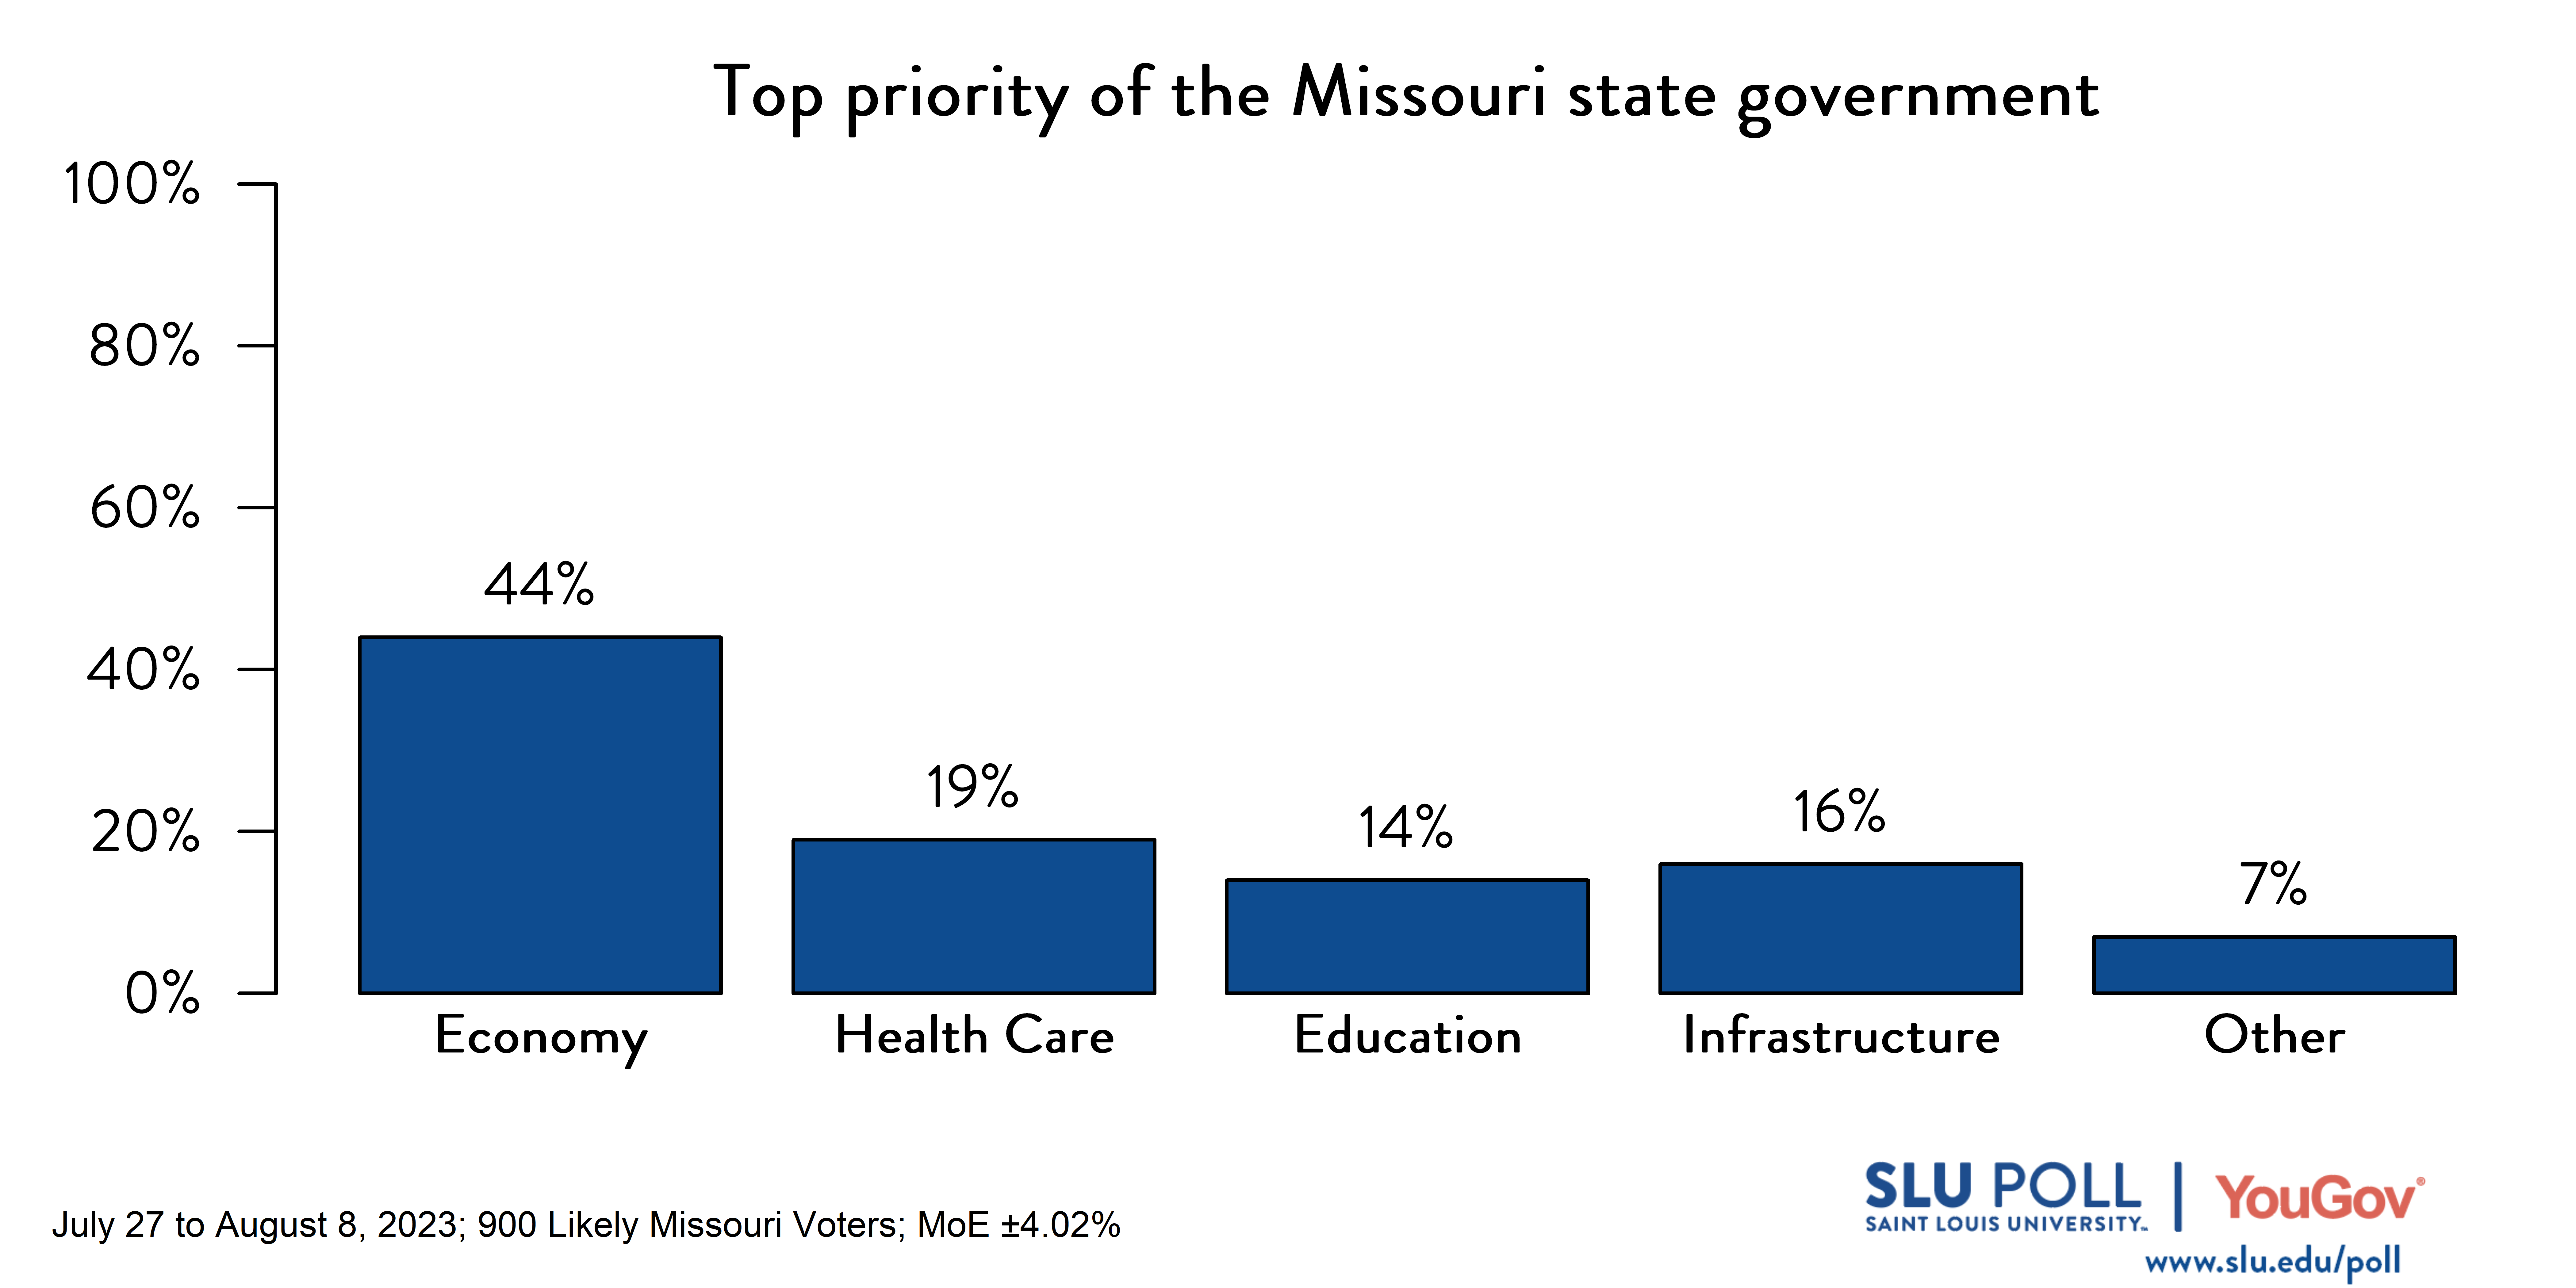 Likely voters' responses to 'Which of the following do you think should be the TOP priority of the Missouri state government?': 44% Economy, 19% Health care, 14% Education, 16% Infrastructure, and 7% Other.